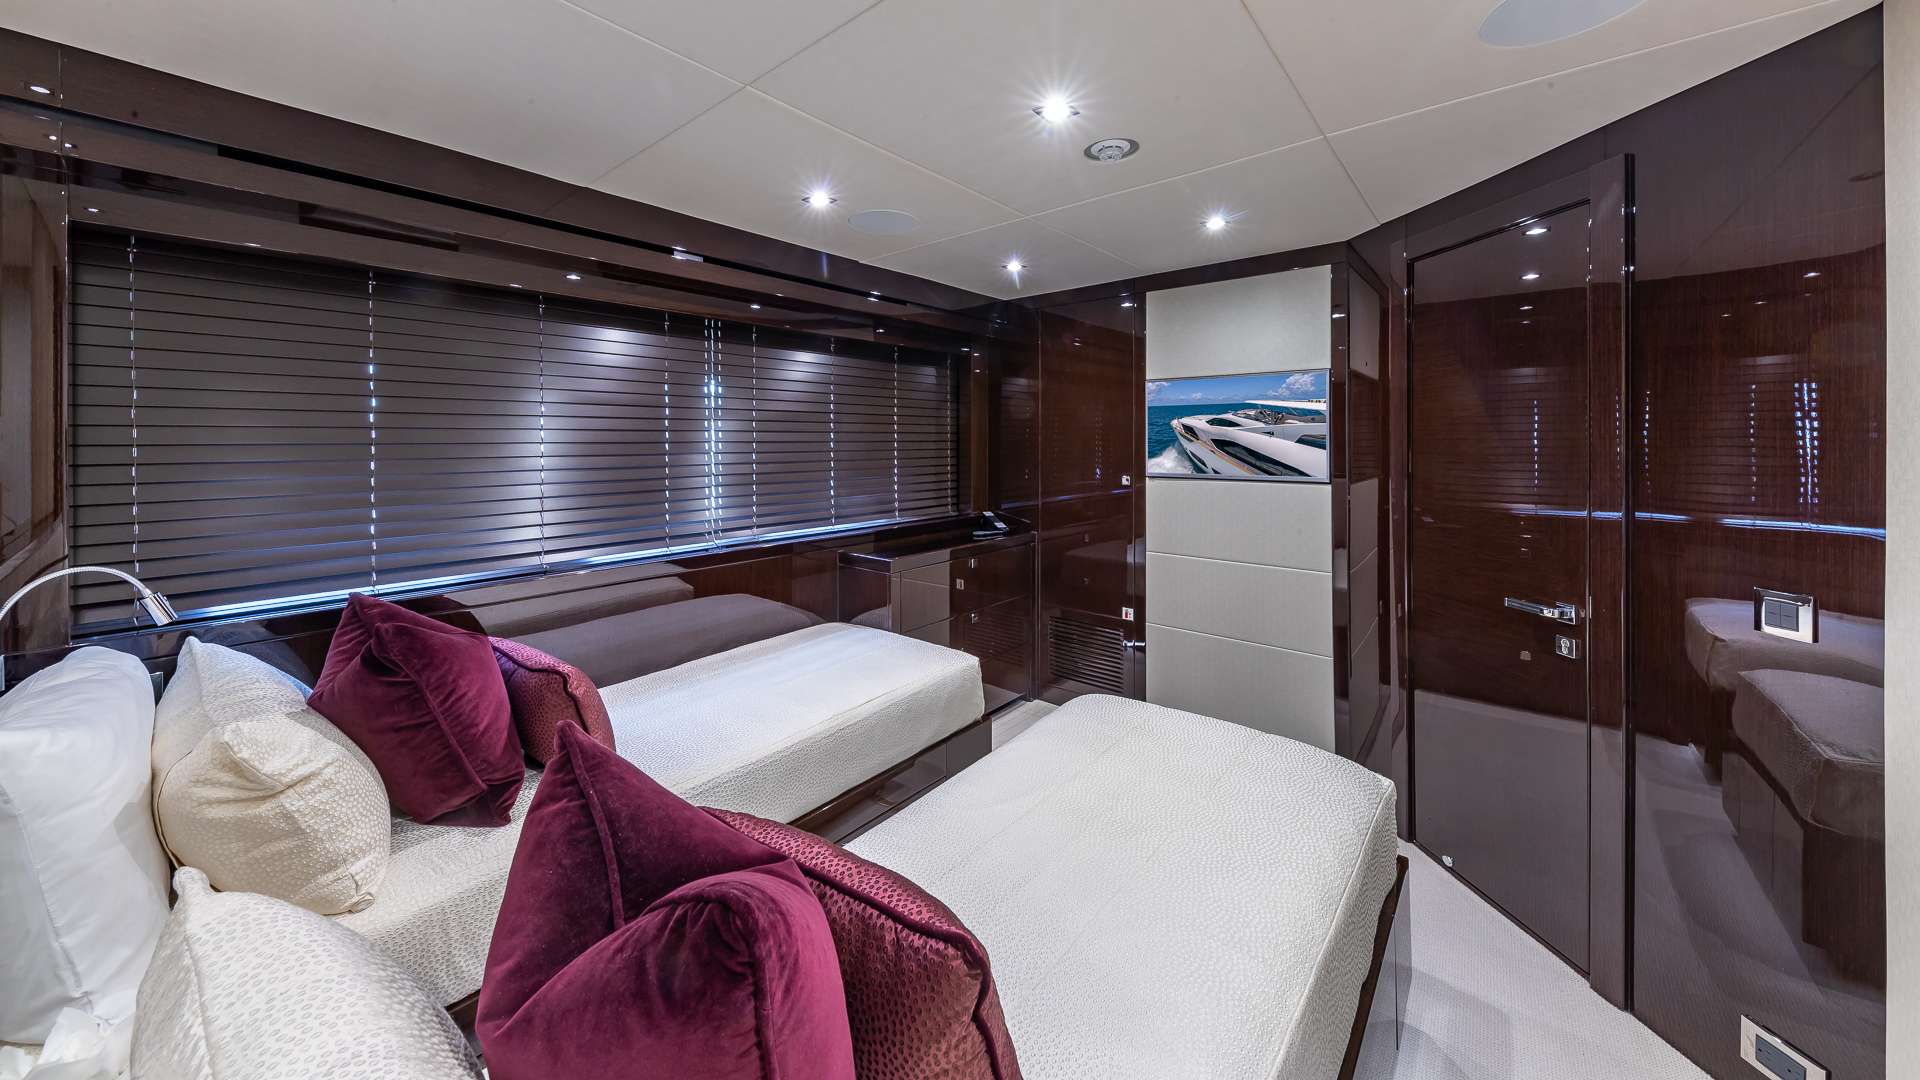 MIRRACLE Yacht Charter - Twin/Queen convertible